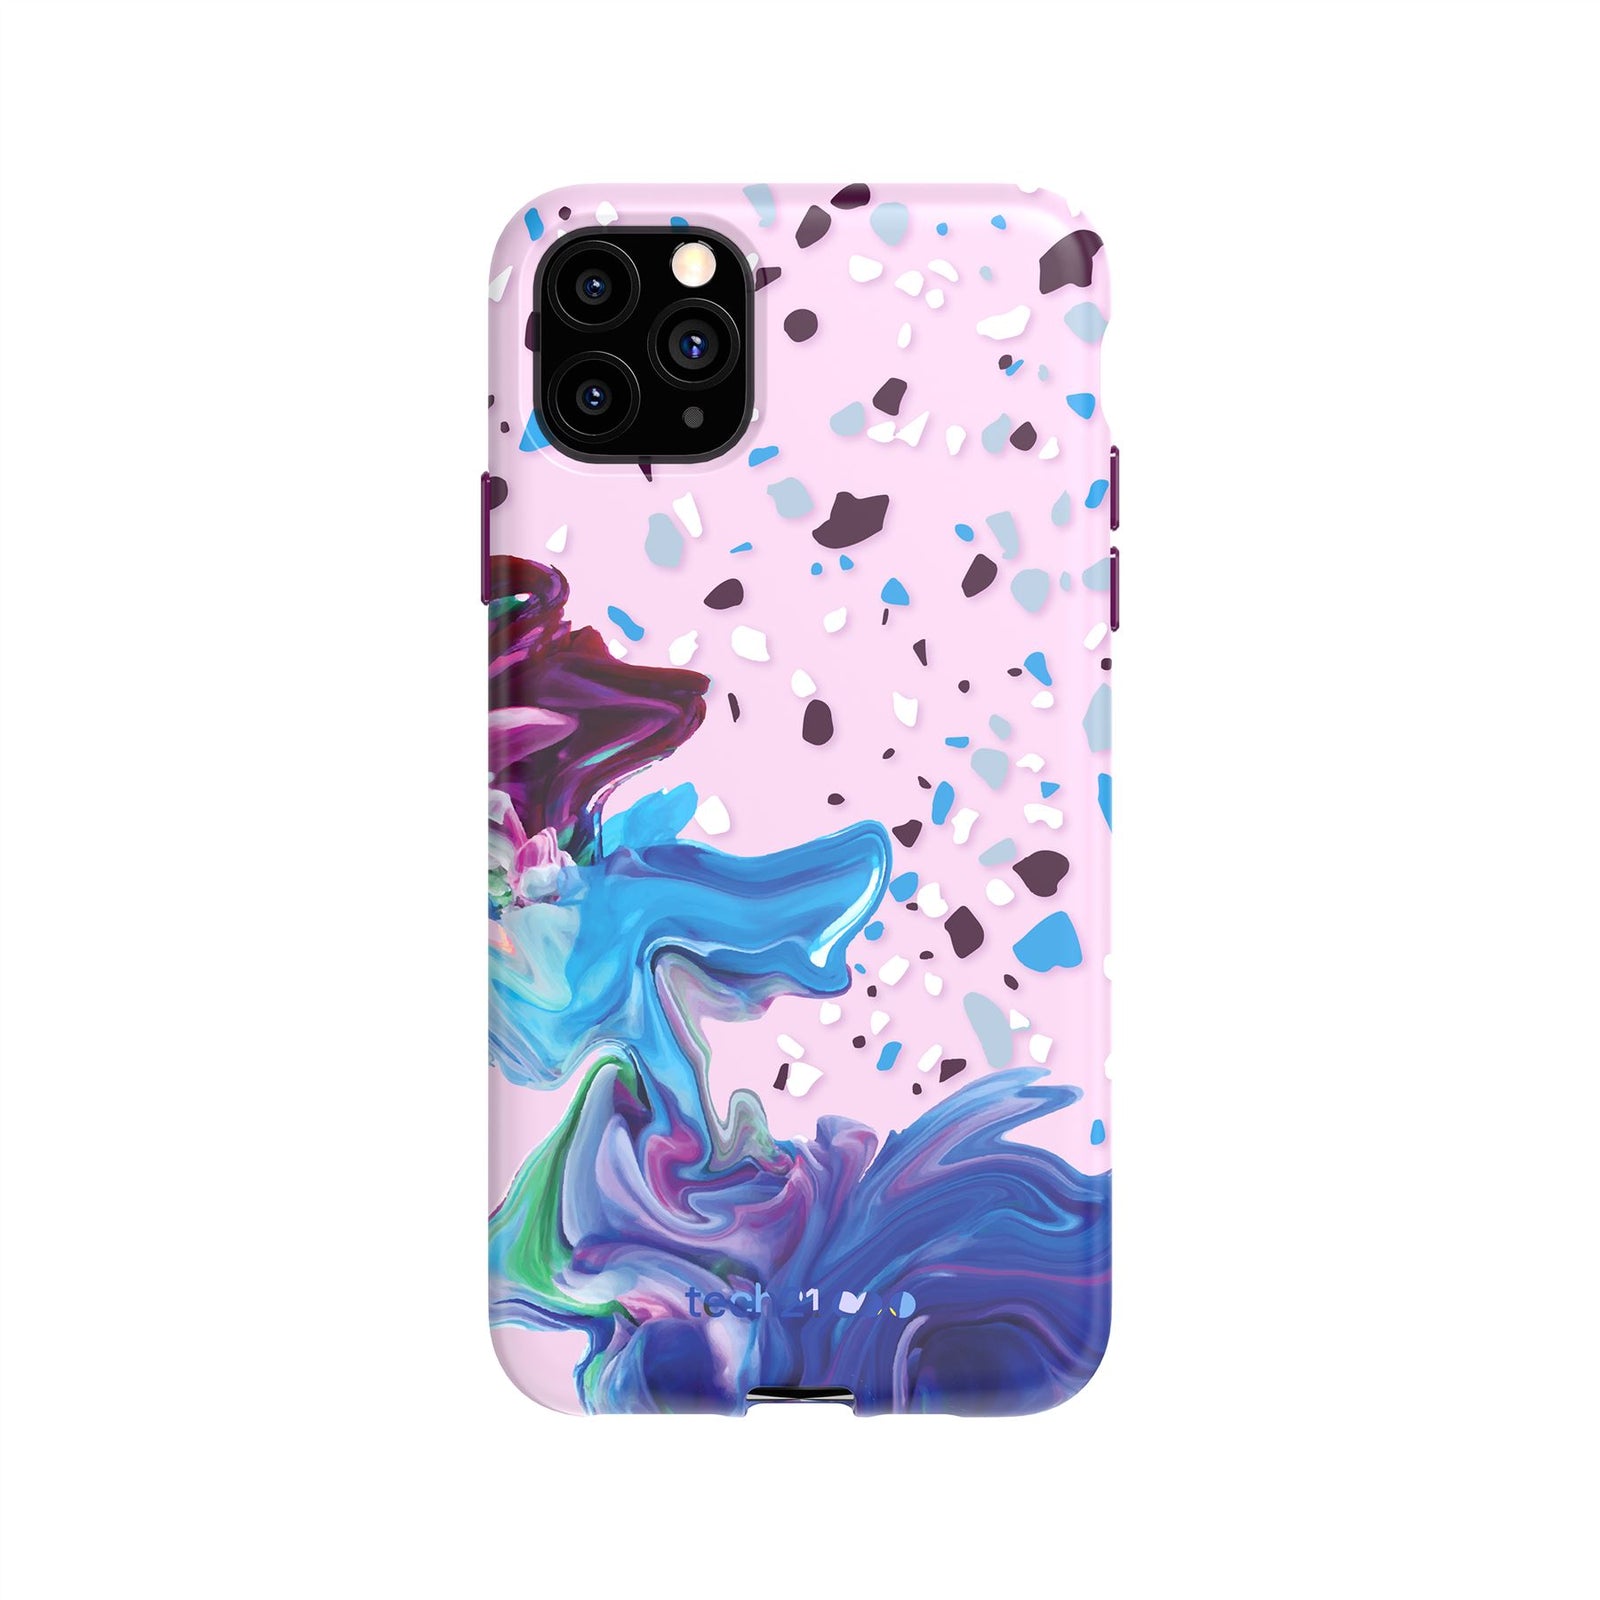 Remix in Motion - Apple iPhone 11 Pro Max Case - Orchid